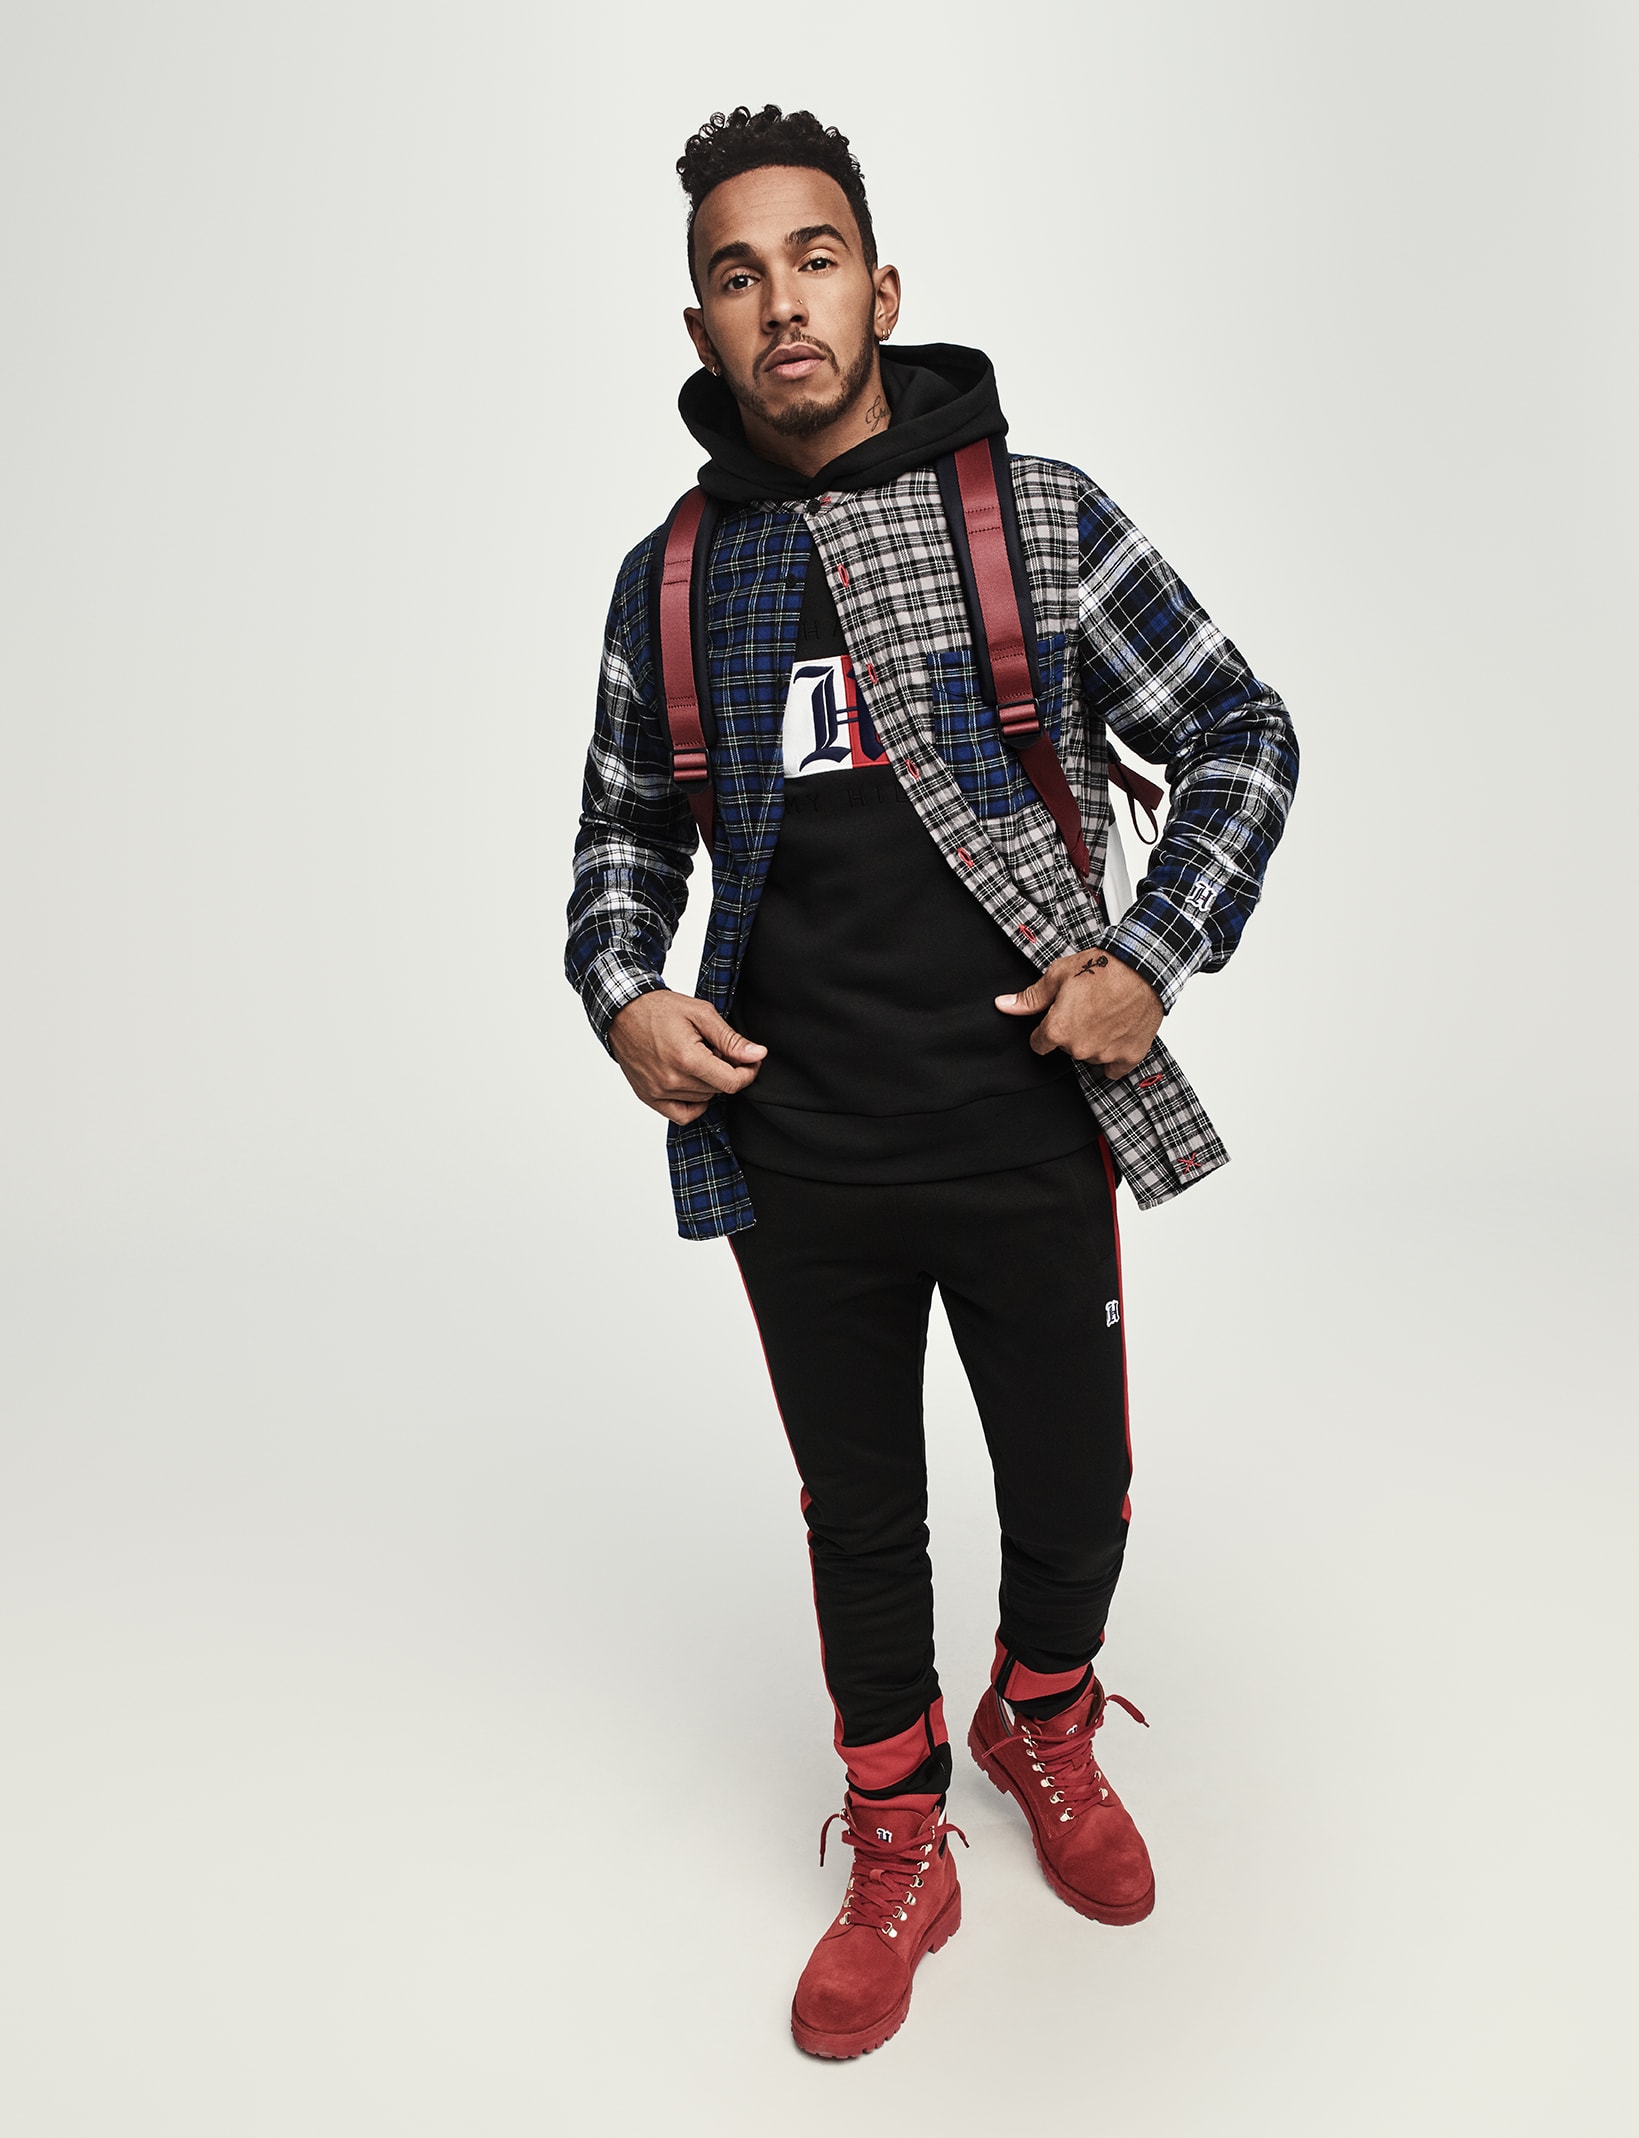 FALL 2018 TOMMYXLEWIS COLLECTION